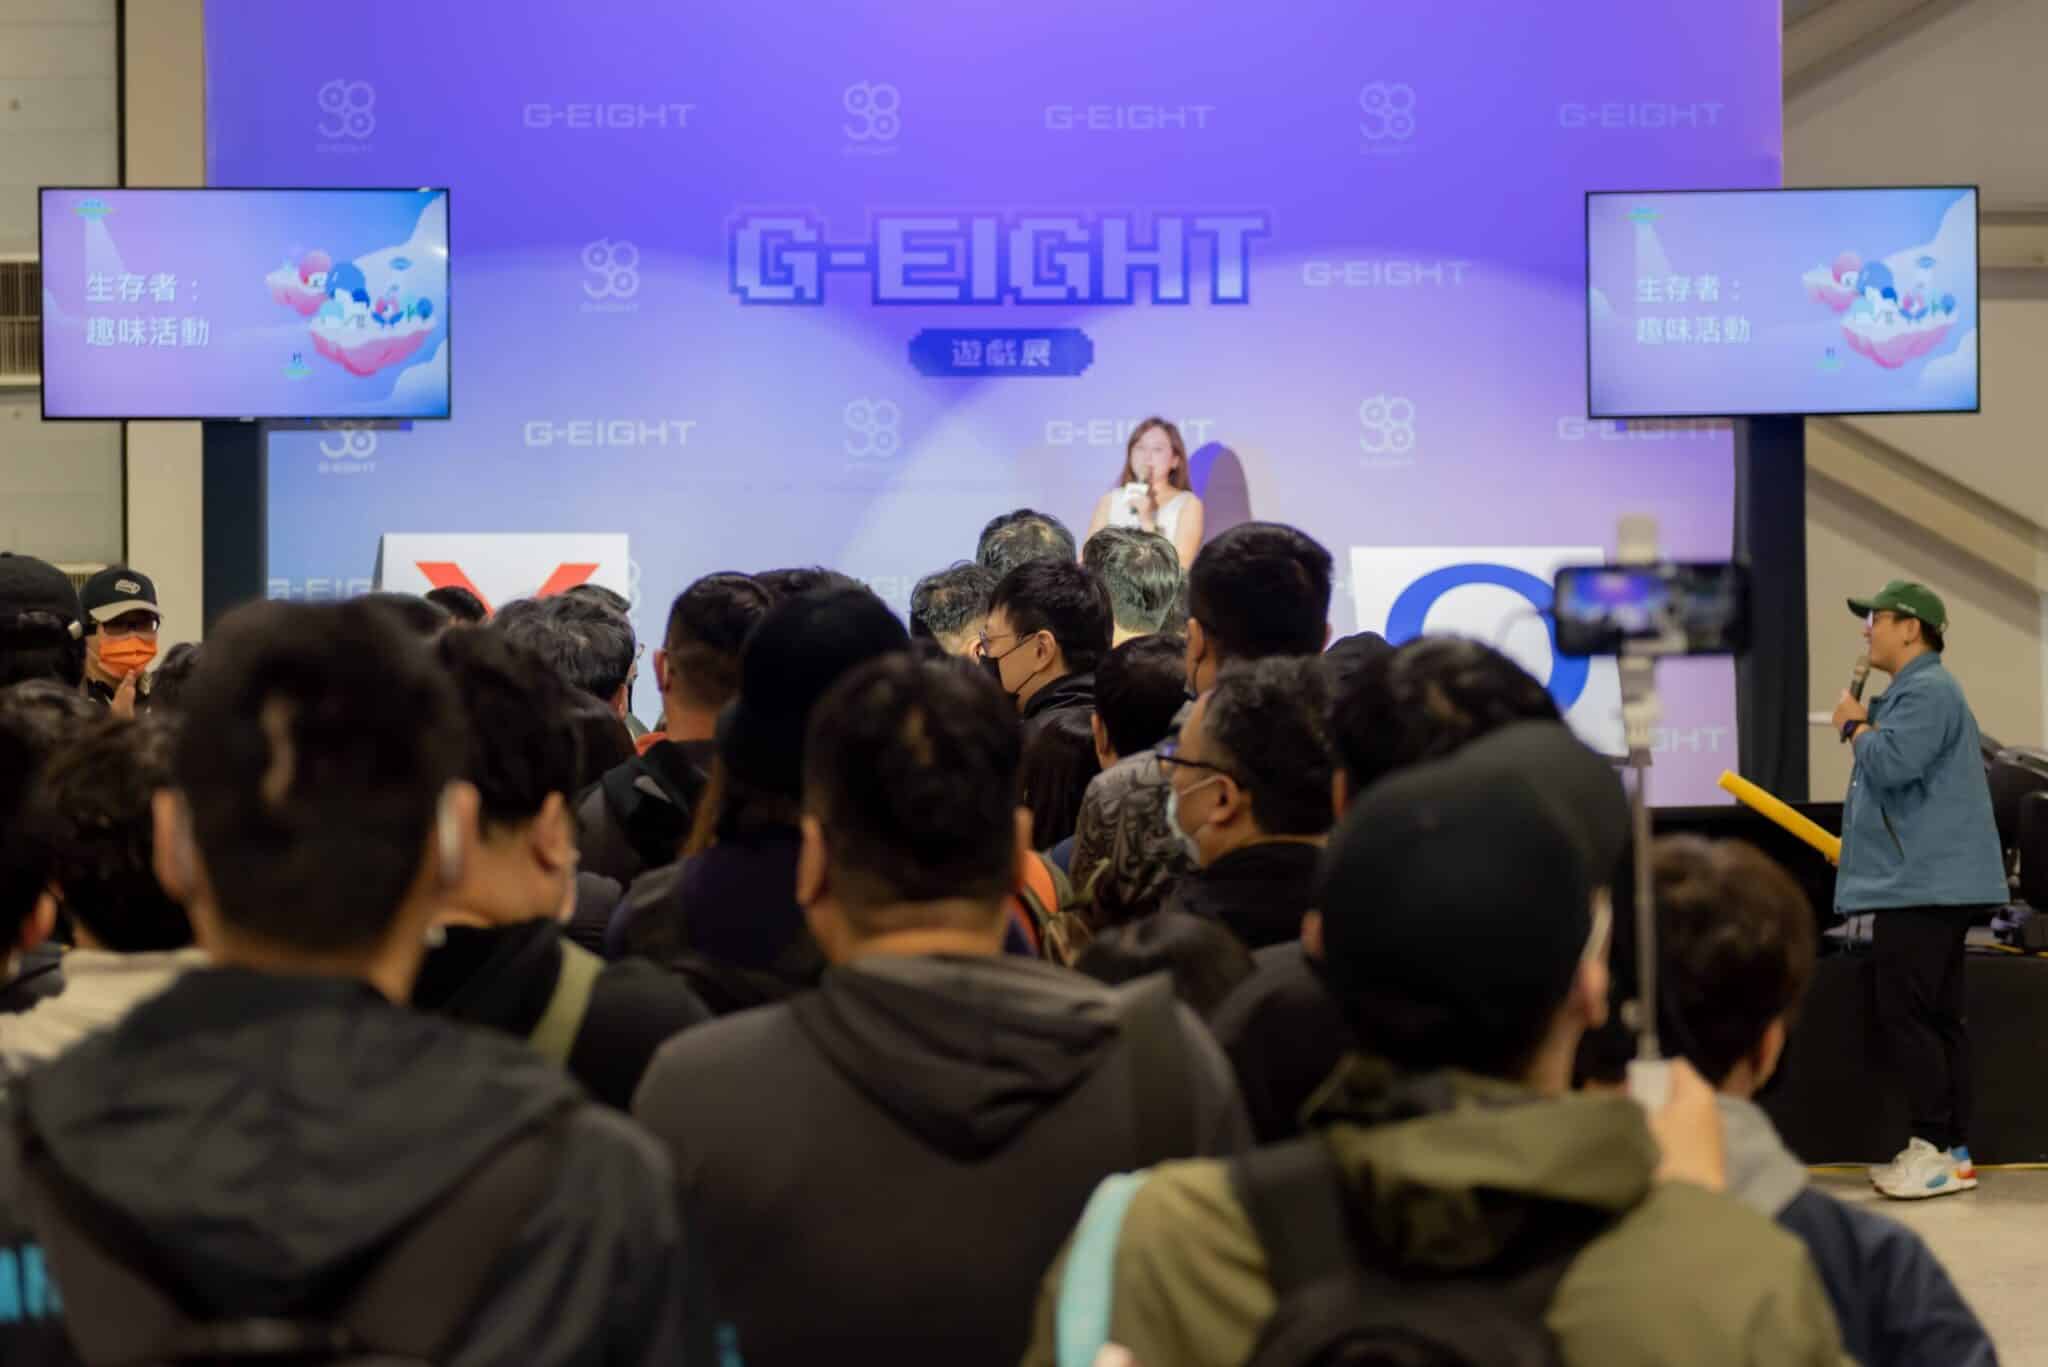 Group of people gather at G-EIGHT game show stage